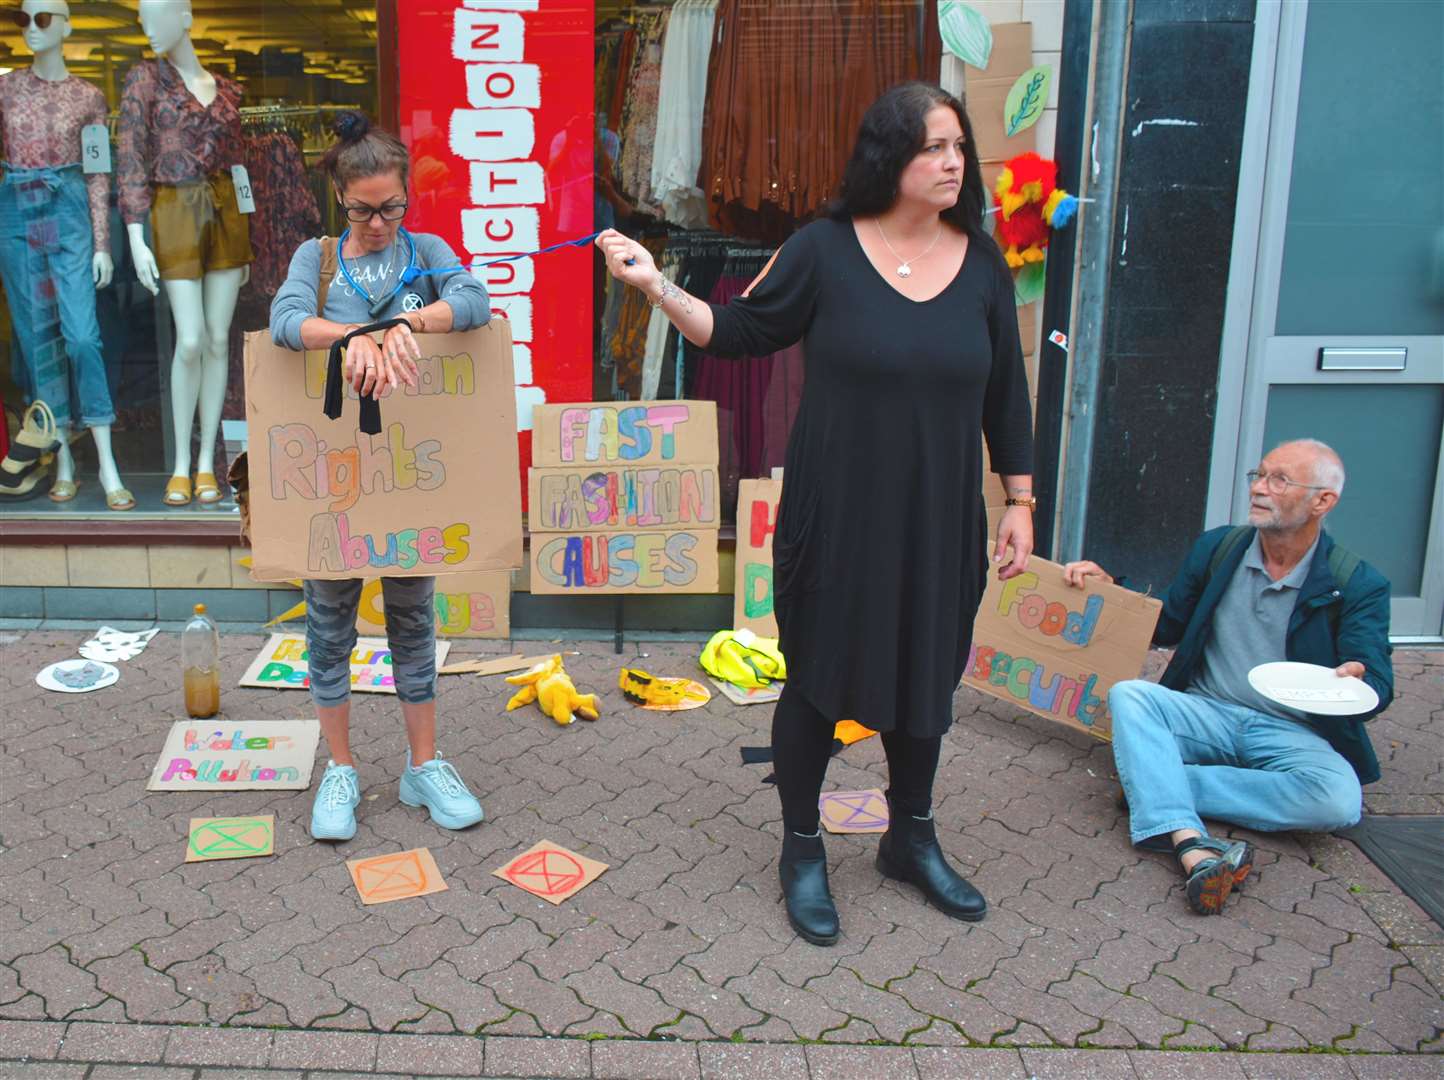 Protesters outside Primark in Dartford, warning shoppers of 'fast fashion'. Picture: Dominic Honey